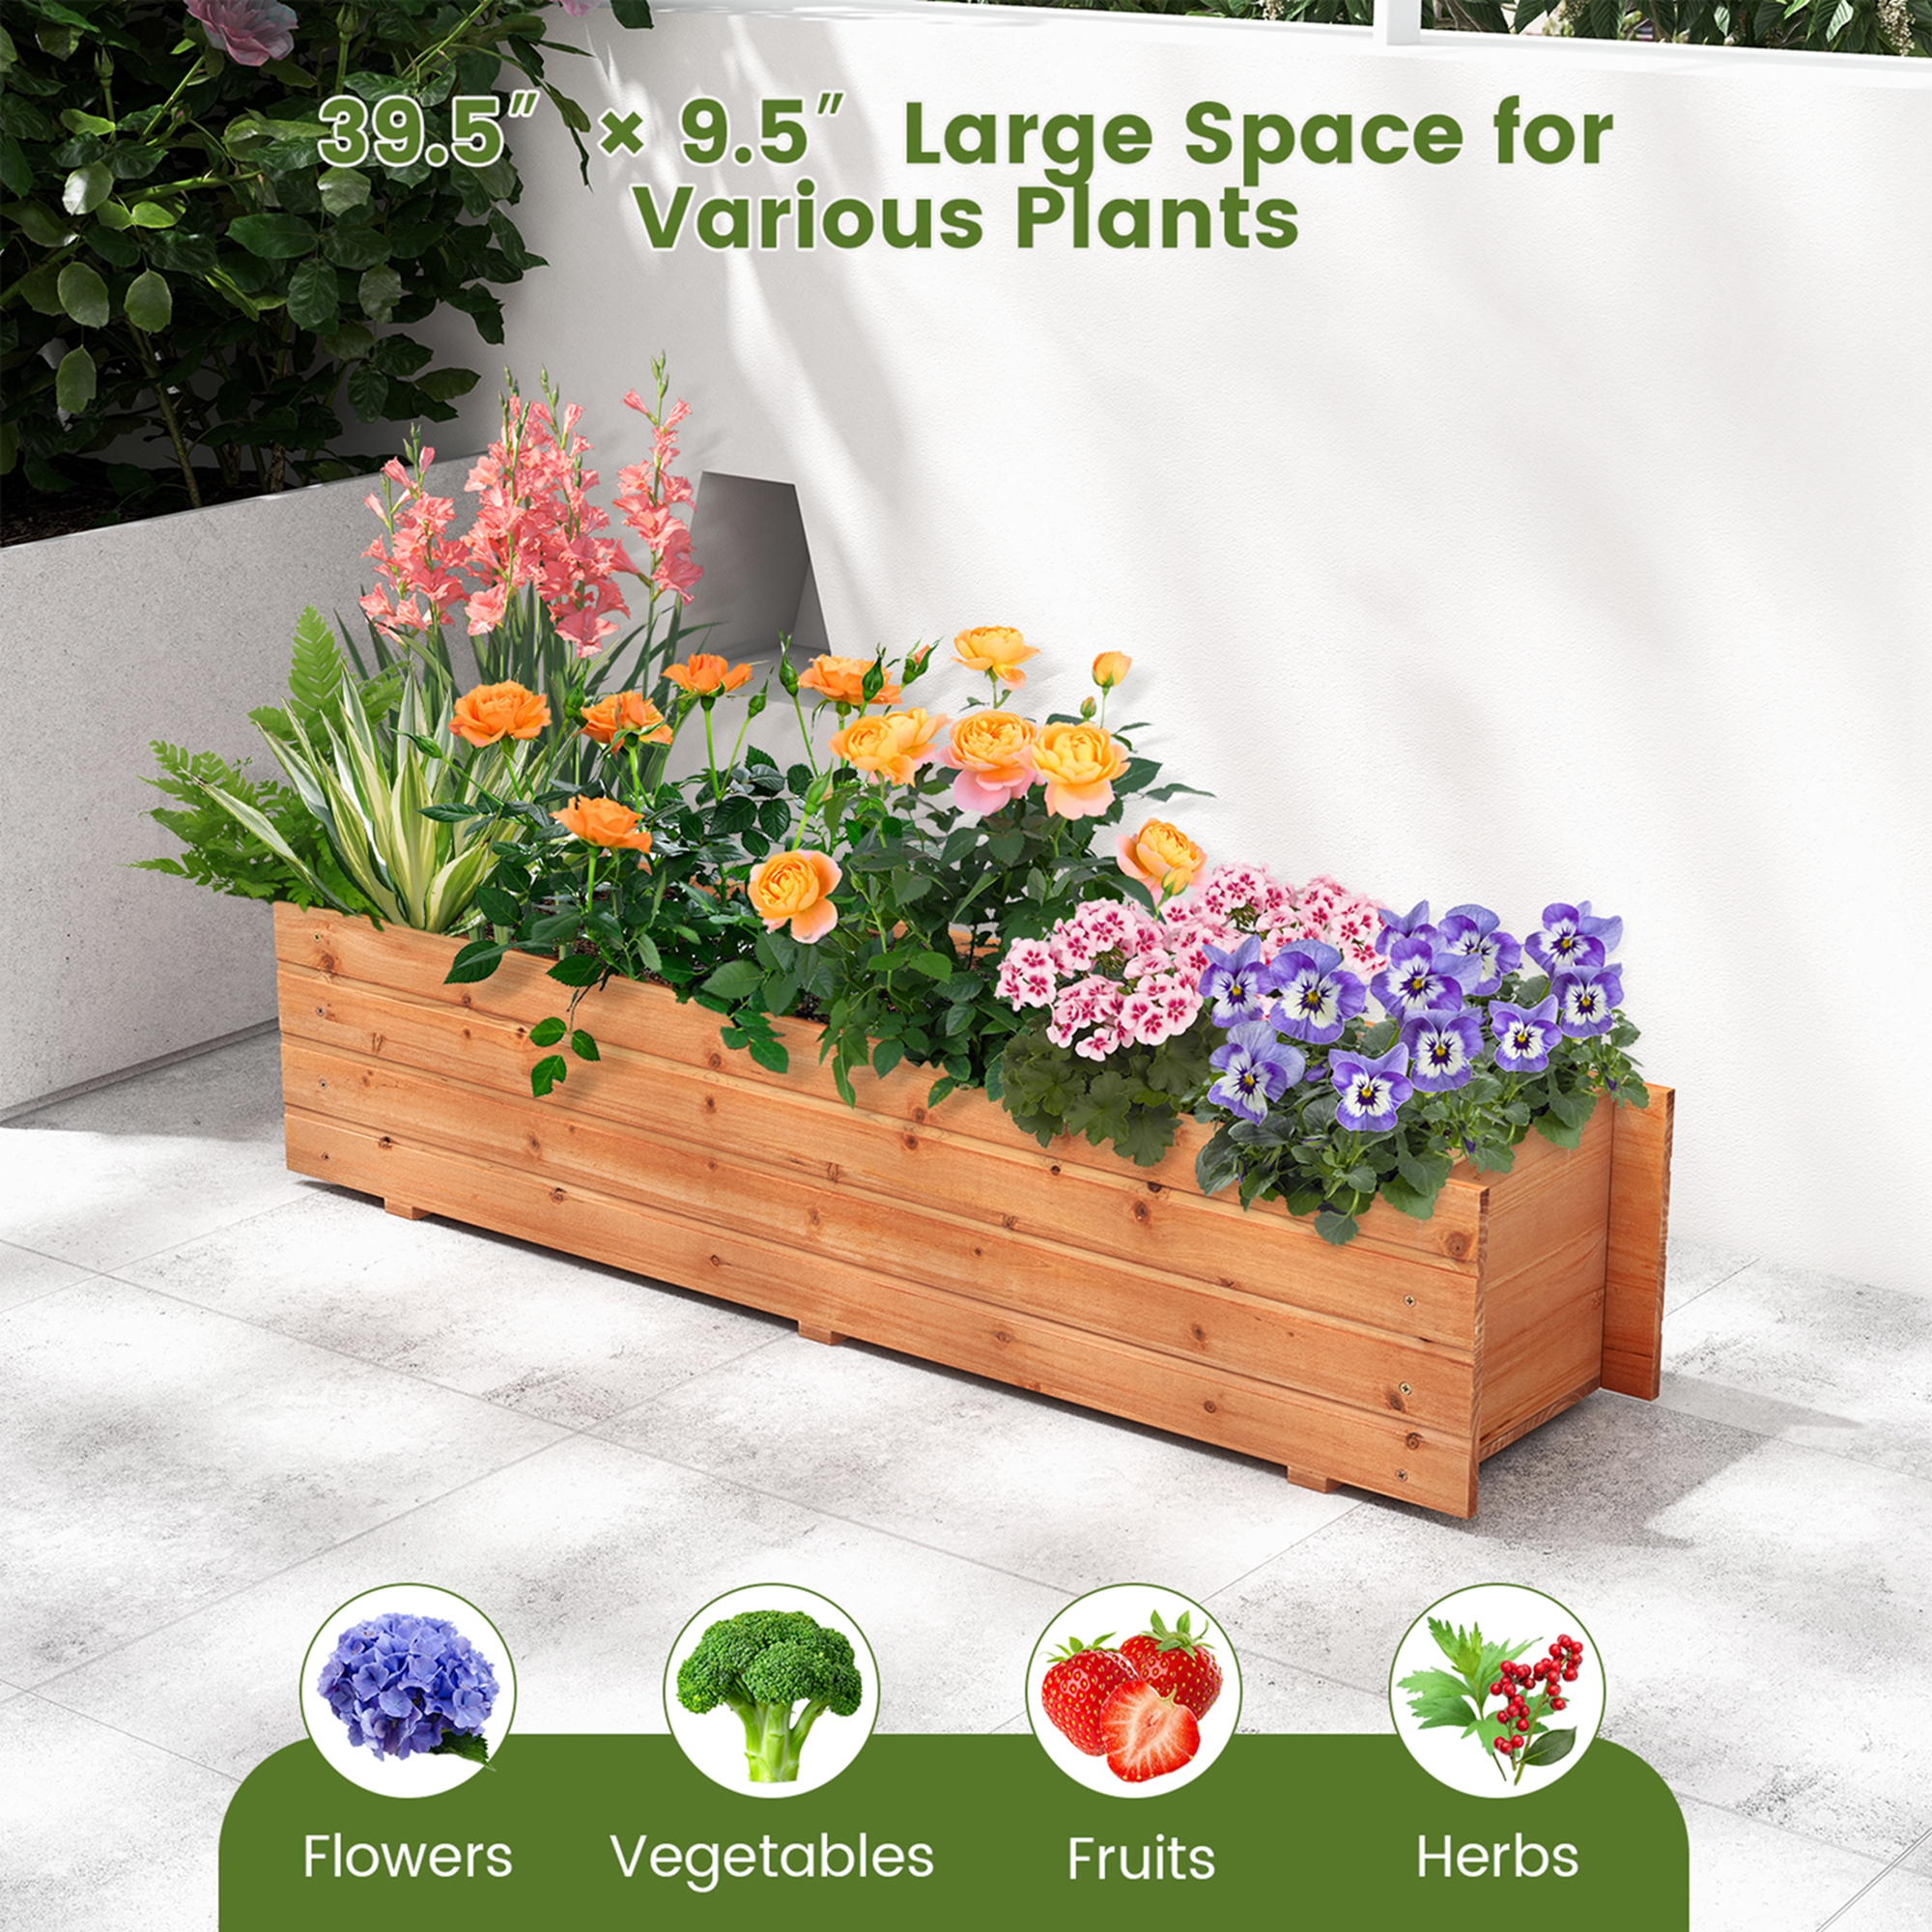 Costway Raised Garden Bed Wood Rectangular Planter Box with 2 Drainage Holes Outdoor - image 5 of 10